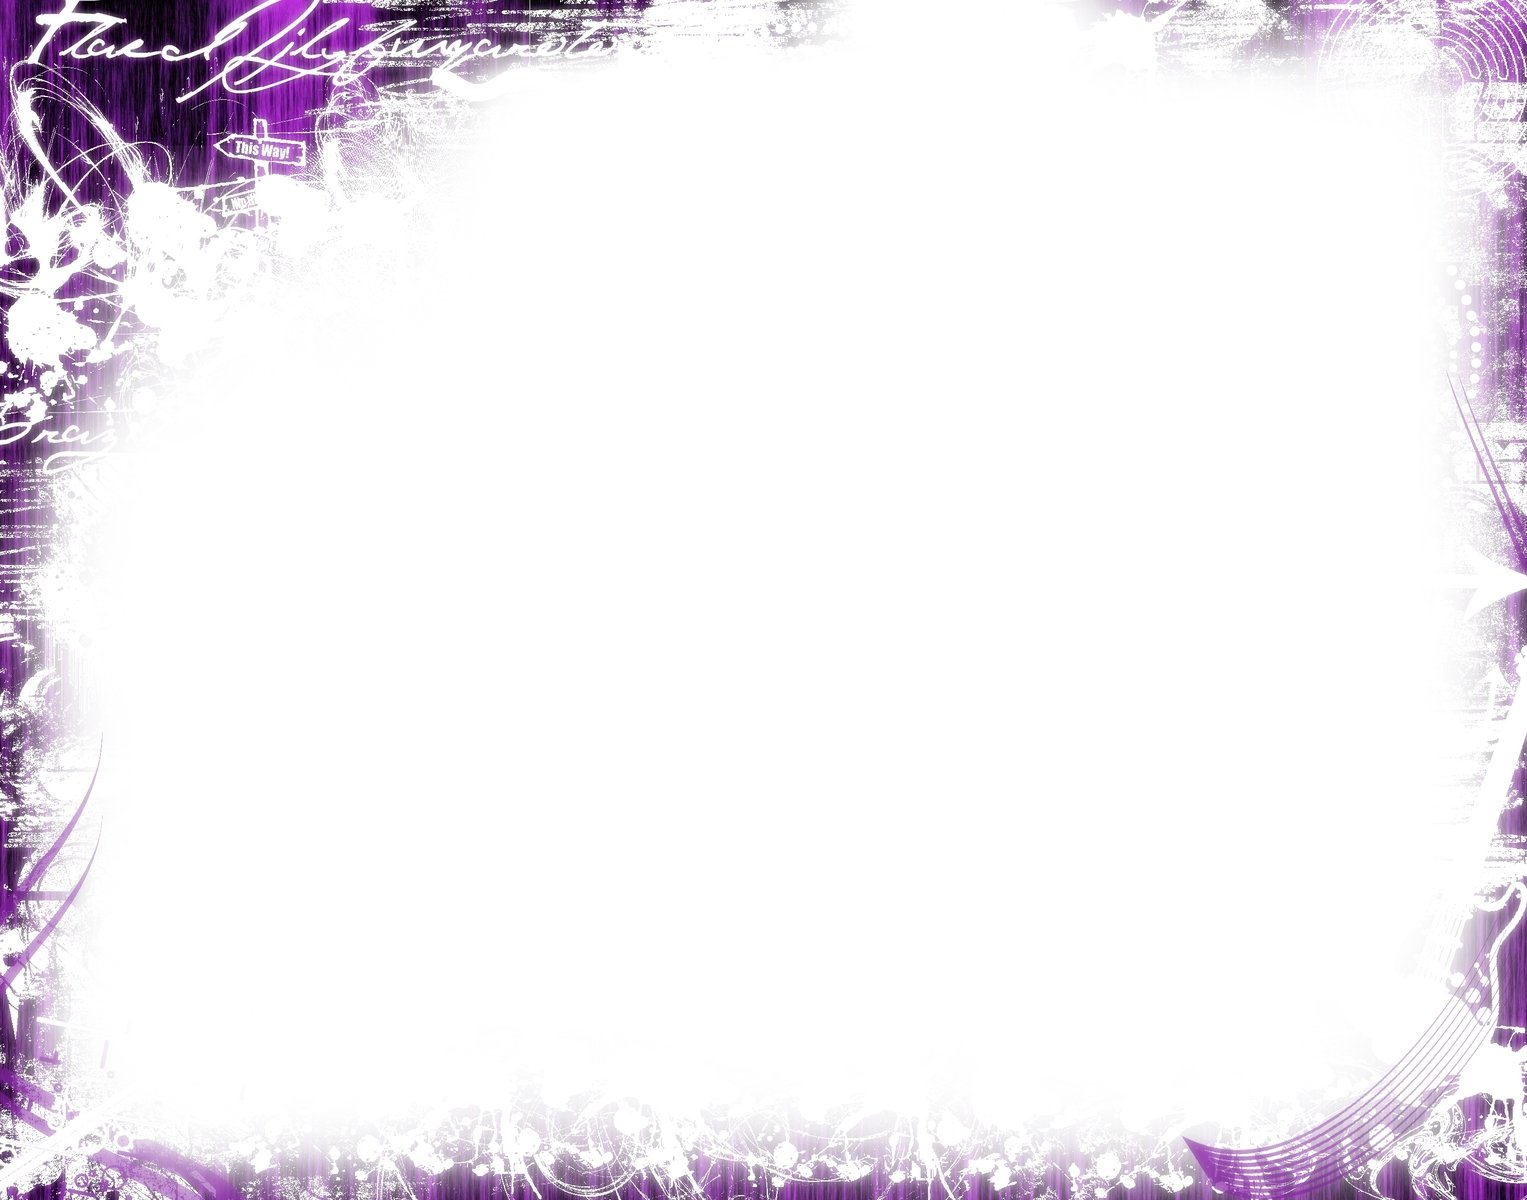 a white frame with black and purple grunge